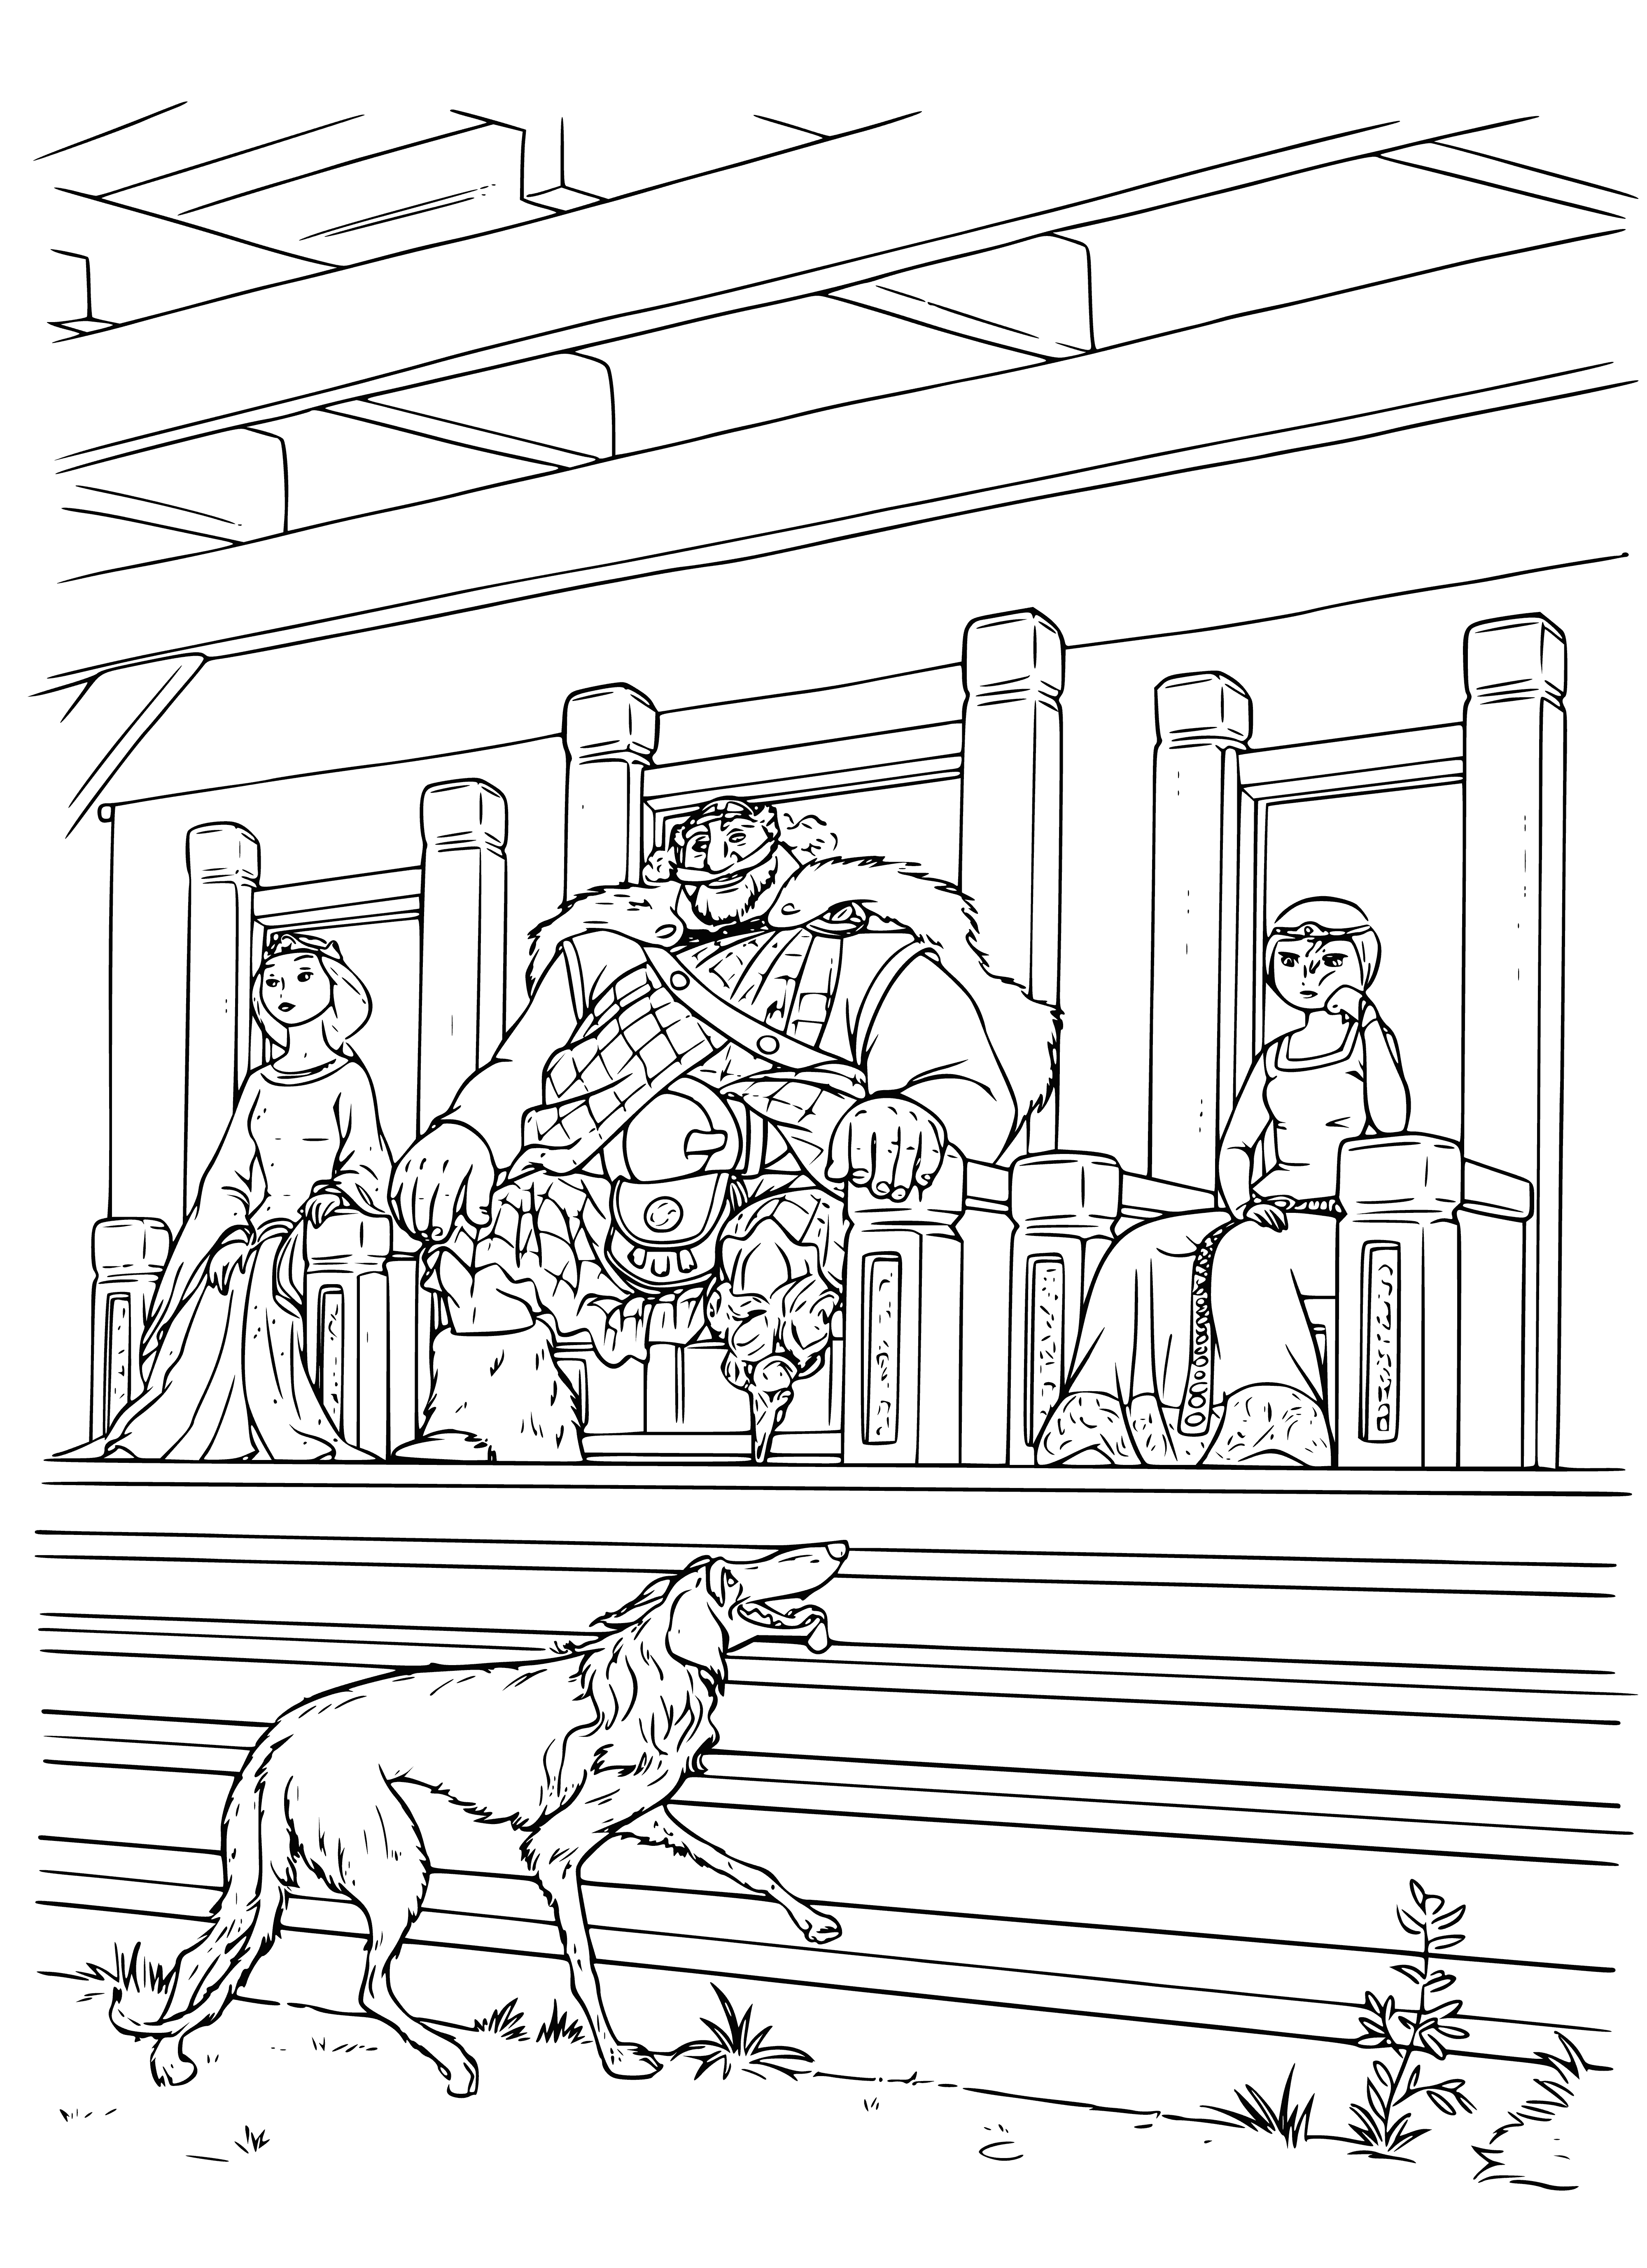 The Royal Family coloring page